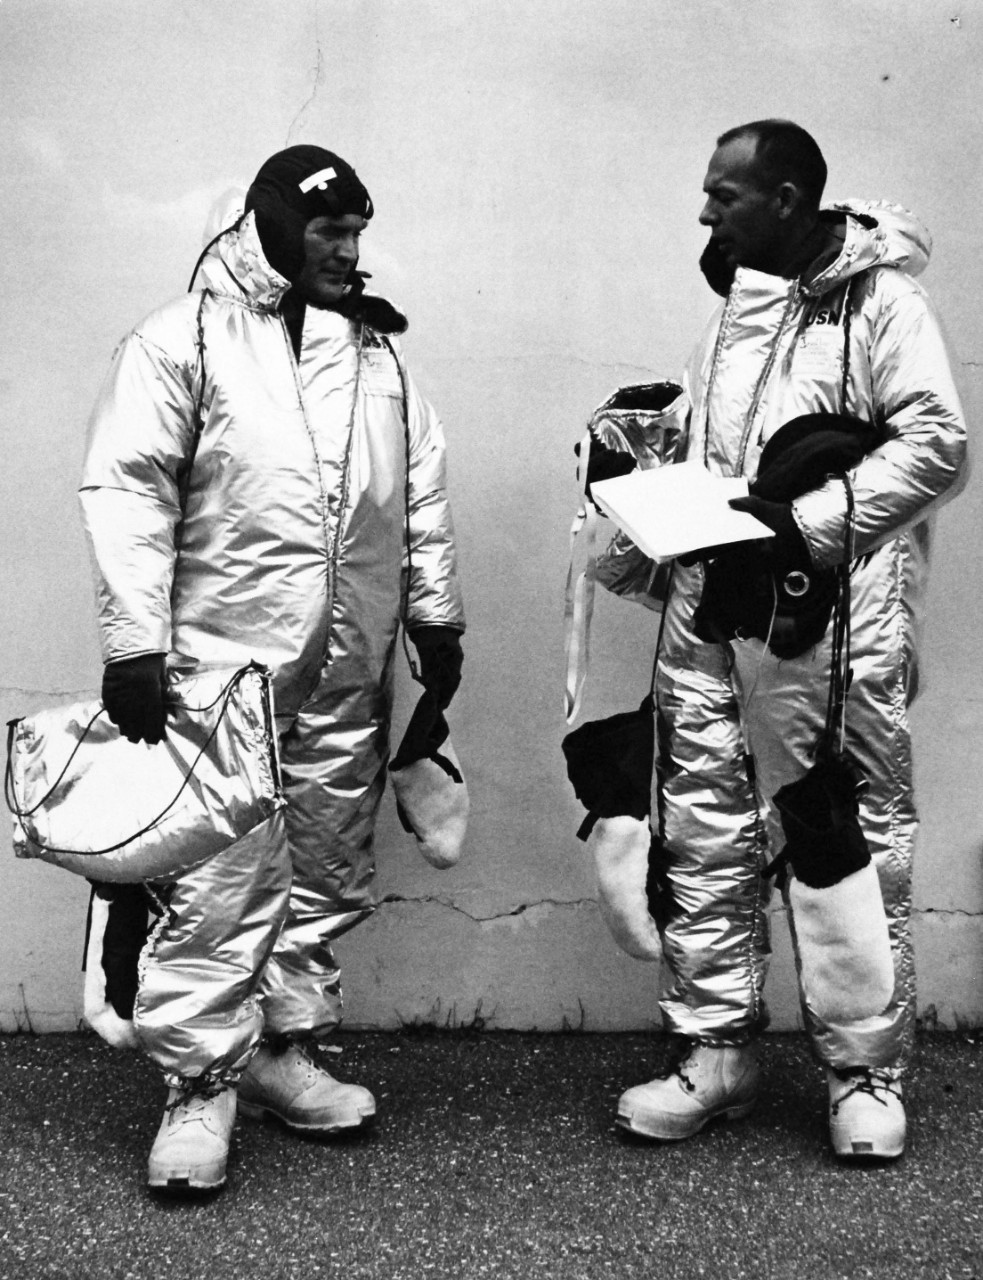 Navy Balloonists To Test New Cold Winter Space Suits.   Commander M.D. Ross, USNR, right, U.S. Navy Balloon Pilot, discusses his newly designed cold weather space suit with Mr. Cooper, Flight Scientist of the High Altitude Observatory, University of Colorado.  The two astronomers will use the new suits on their balloon and on a gondola by atmosphere flight from the Stratobowl Laboratory near Rapid City, South Dakota, planned for 1 August 1959.  The Strato Lab flight is one of the continuing series planned by the Office of Naval Research.  Primary insulating assembly on the new garment consists of two rubberized fabrics coated with a thin aluminum film a string-like plastic spacer holds the two fabrics apart.  This arrangement provides good insulation and reduces heat transferred radiation.  The cold weather uniform was developed by the clothing division of the U.S. Navy Supply Research and Development Facility.   Official U.S. Navy photograph, now in the collections of the National Archives.     